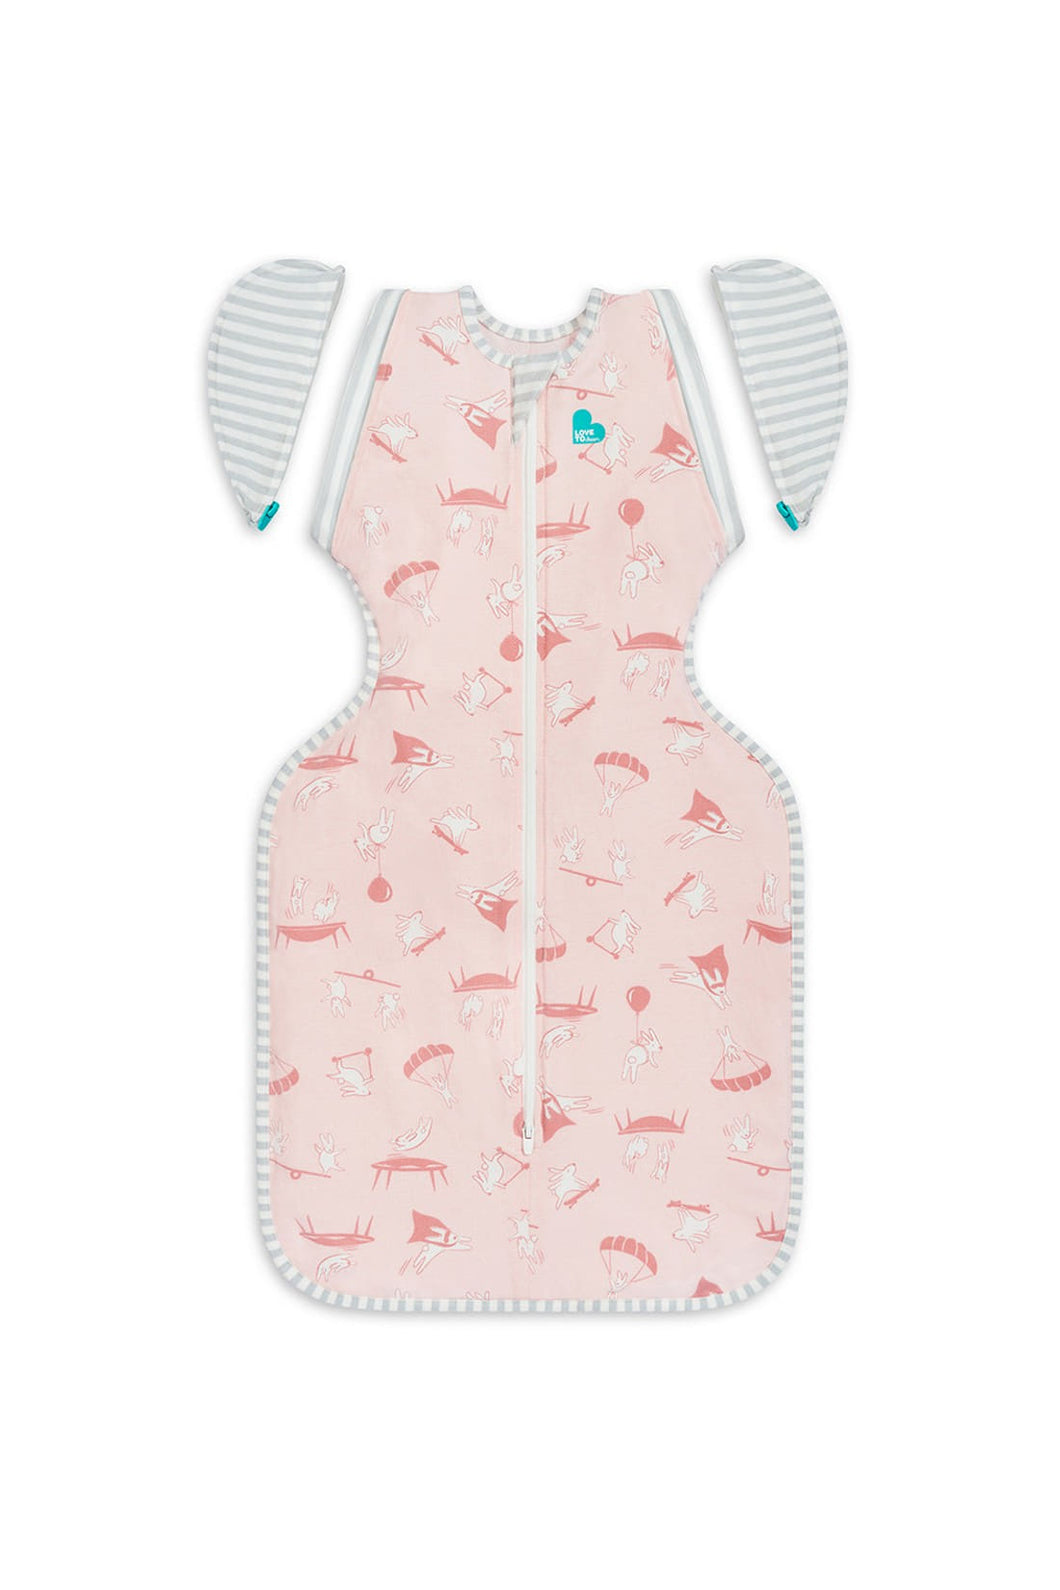 Love To Dream Swaddle UP Transition Bag Lite Daredevil Bunny - Pink 2